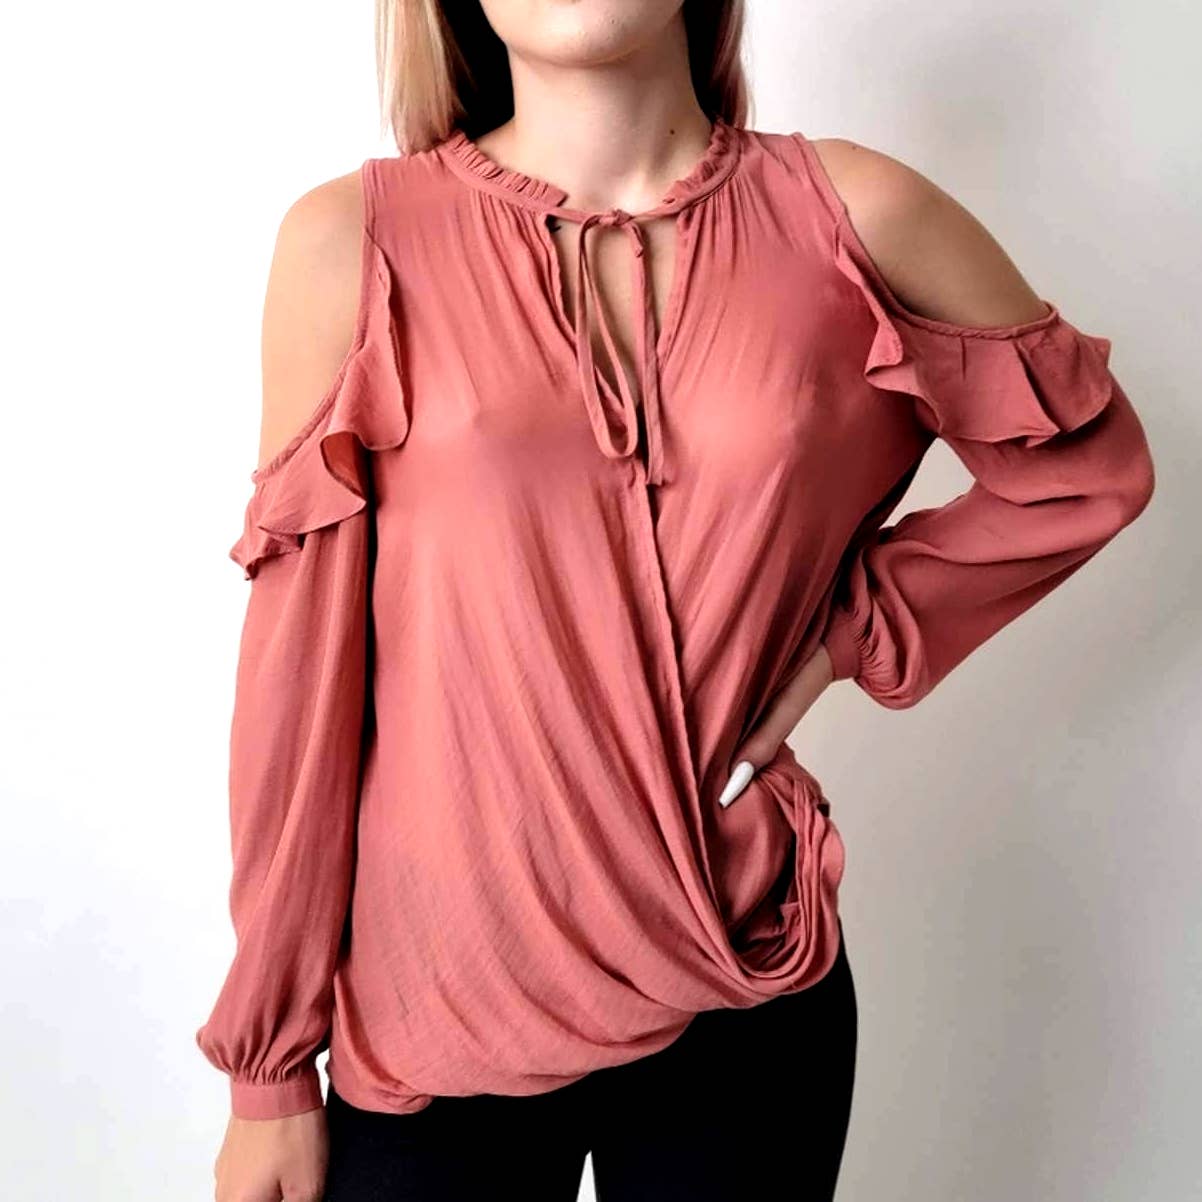 Anthropology Maeve Liesel Salmon Blush Pink Cold Shoulder Top - S